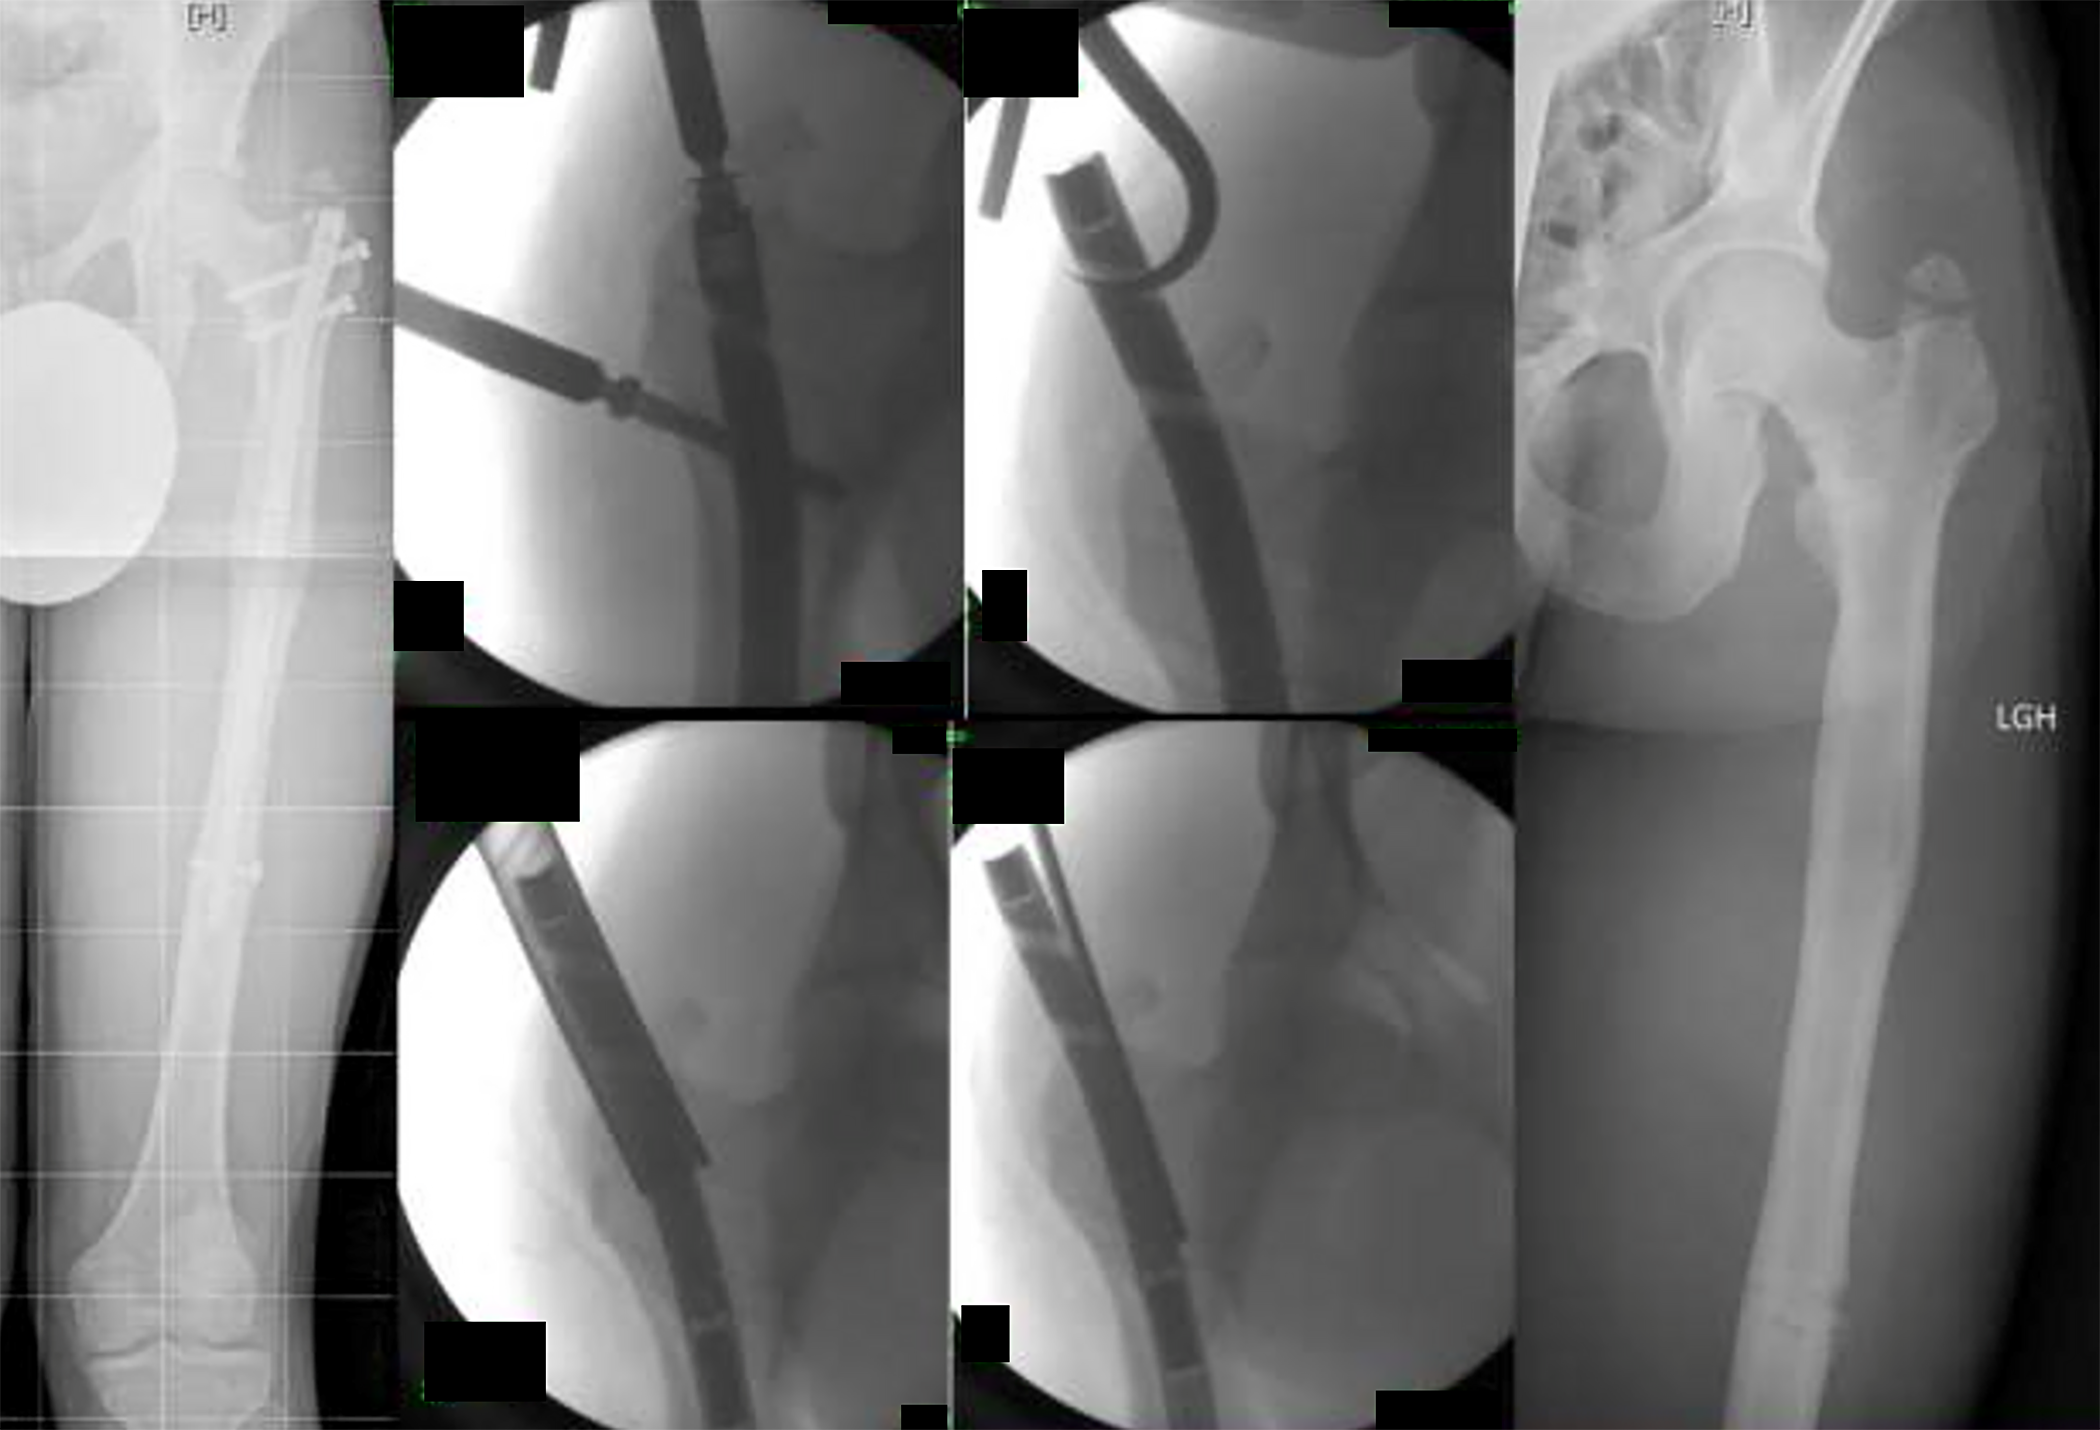 Intraoperative radiographs and fluoroscopic images showing breakage of the extraction mechanism assembly during the removal phase.